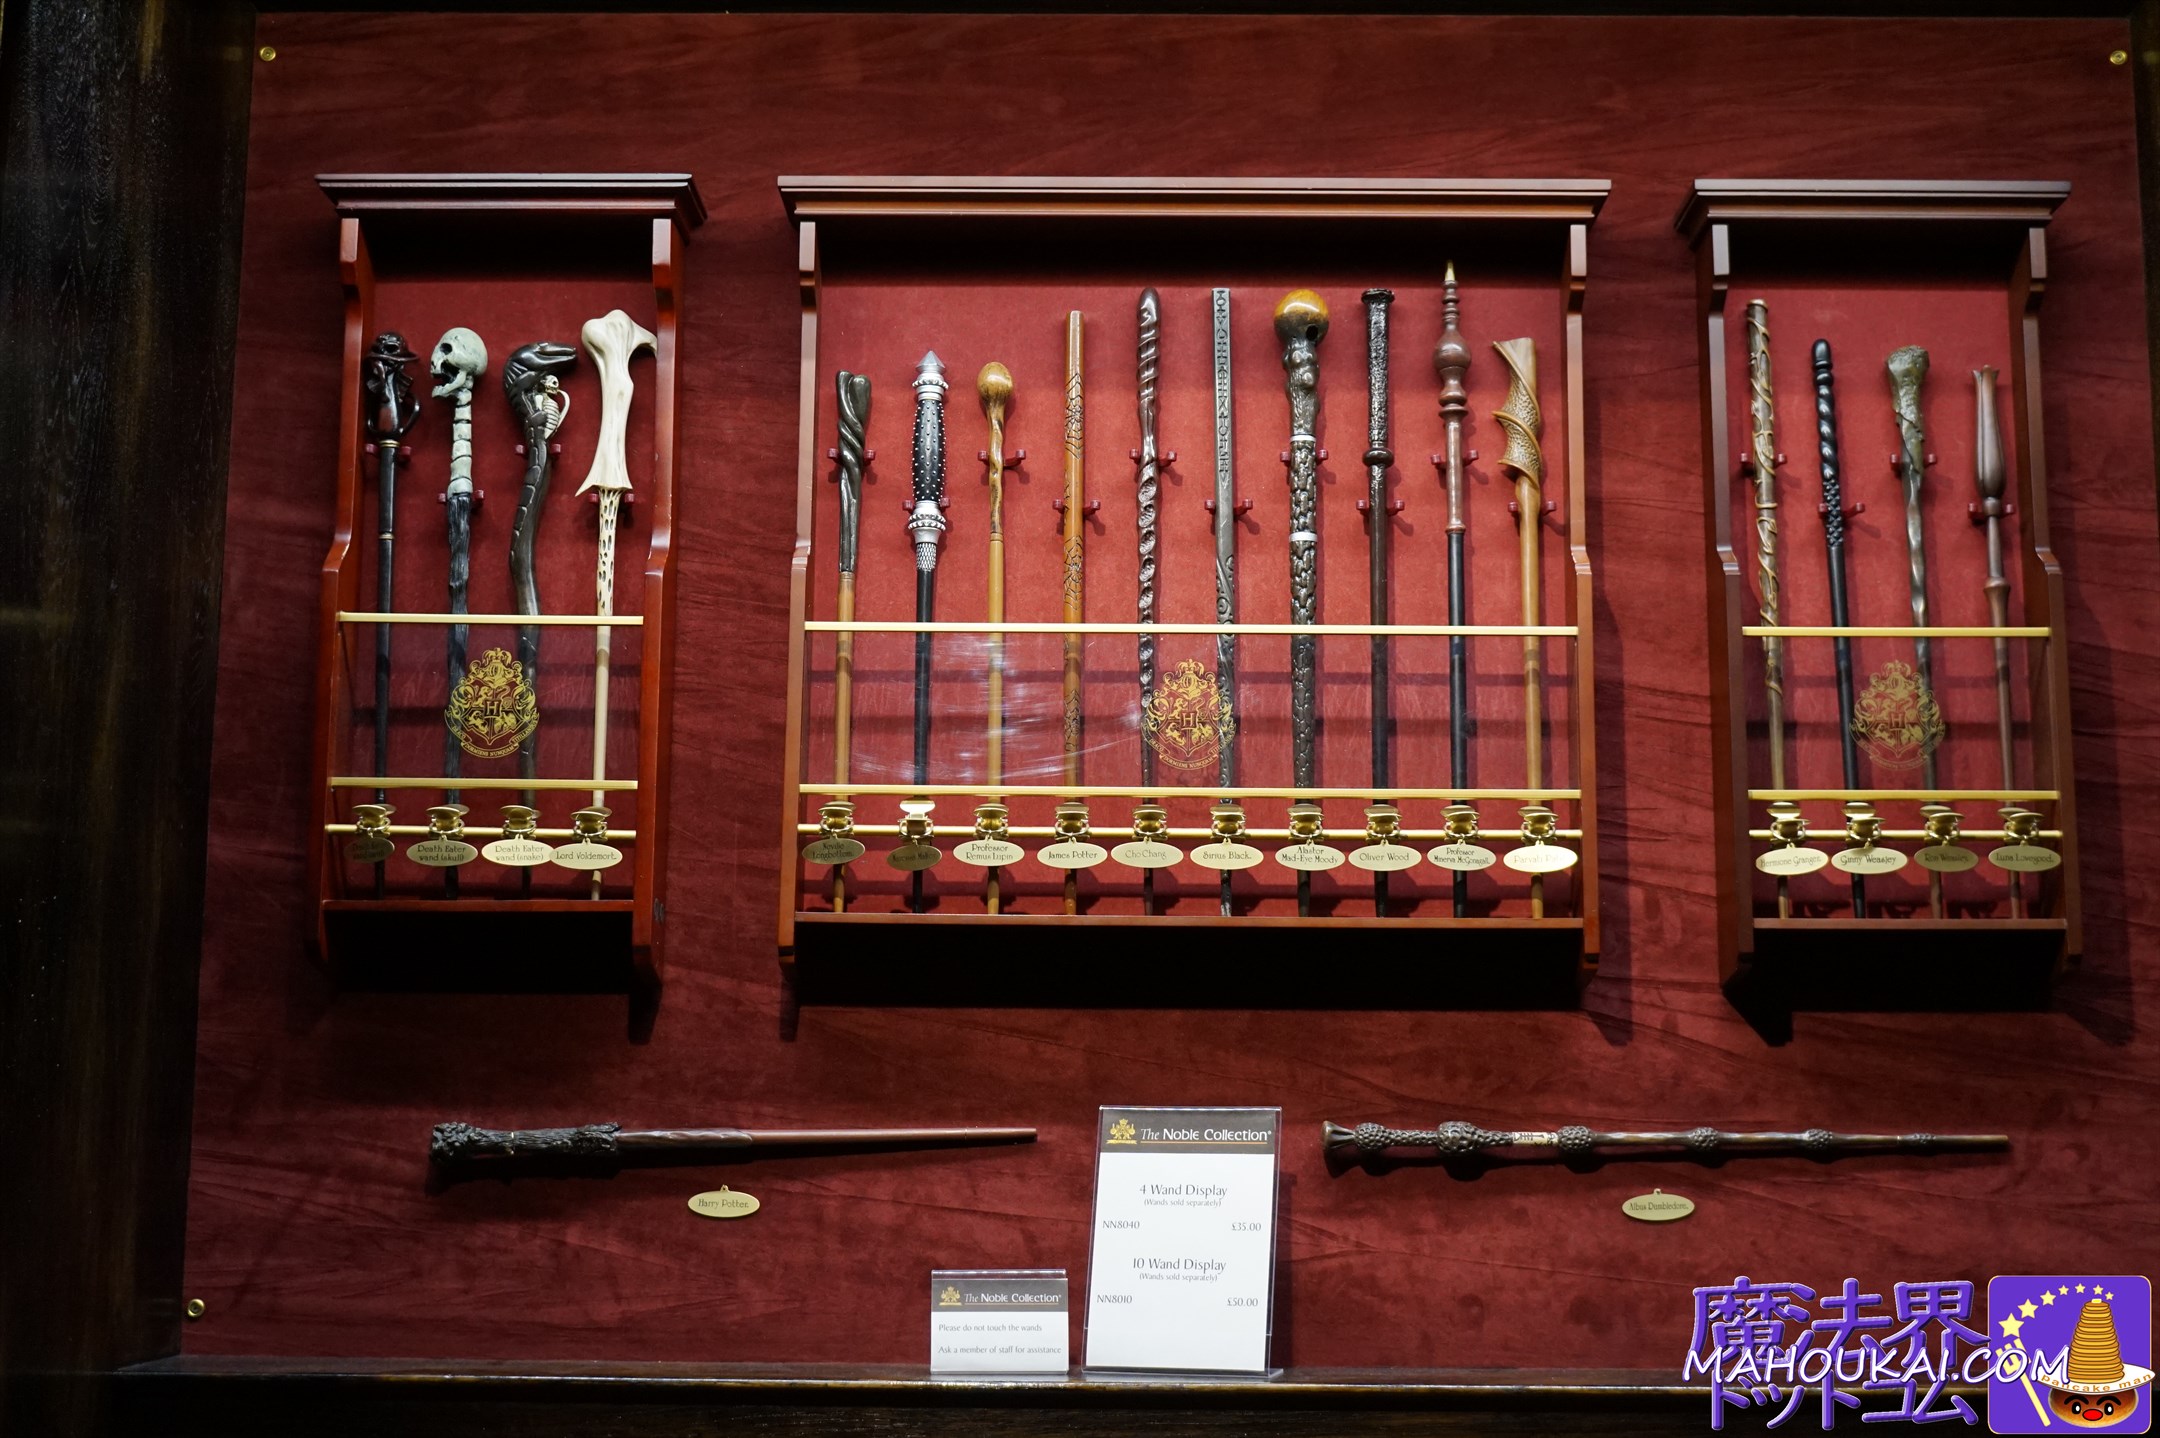 Hogwarts crested wand stand set, The Noble Collection Covent Garden Shop, Harry Potter replica merchandise, London.